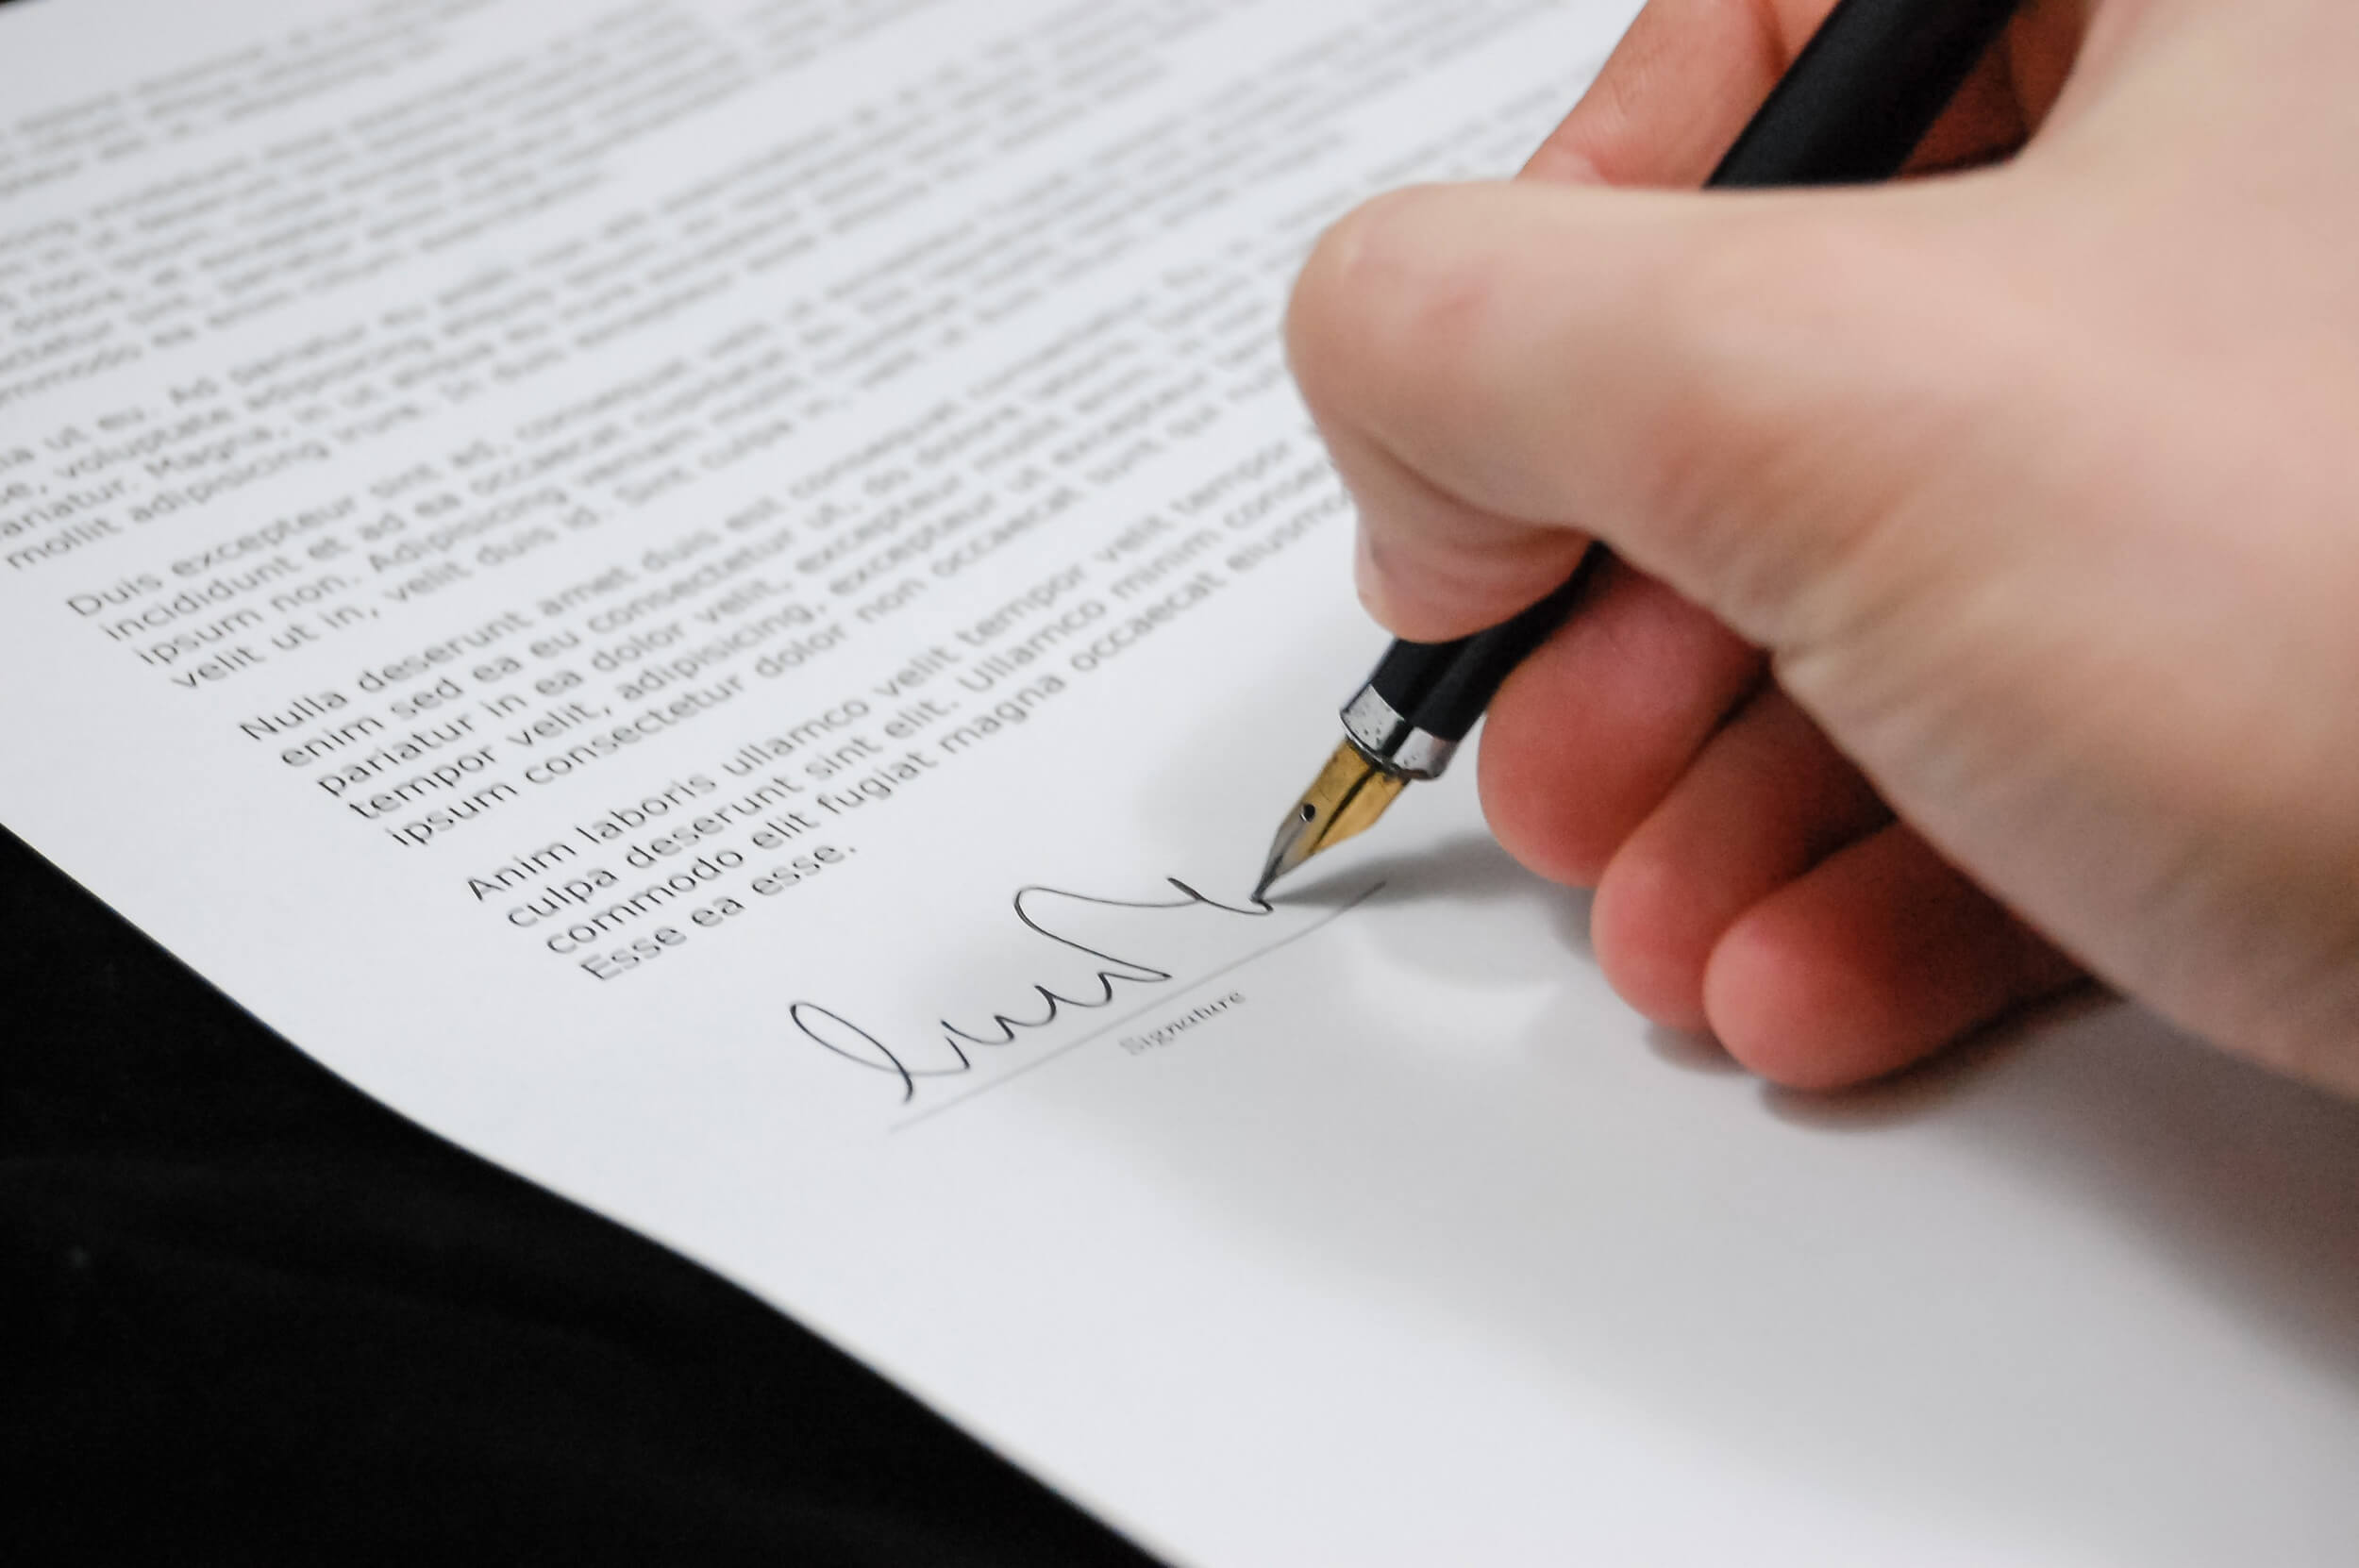 A person signs their signature on a document.